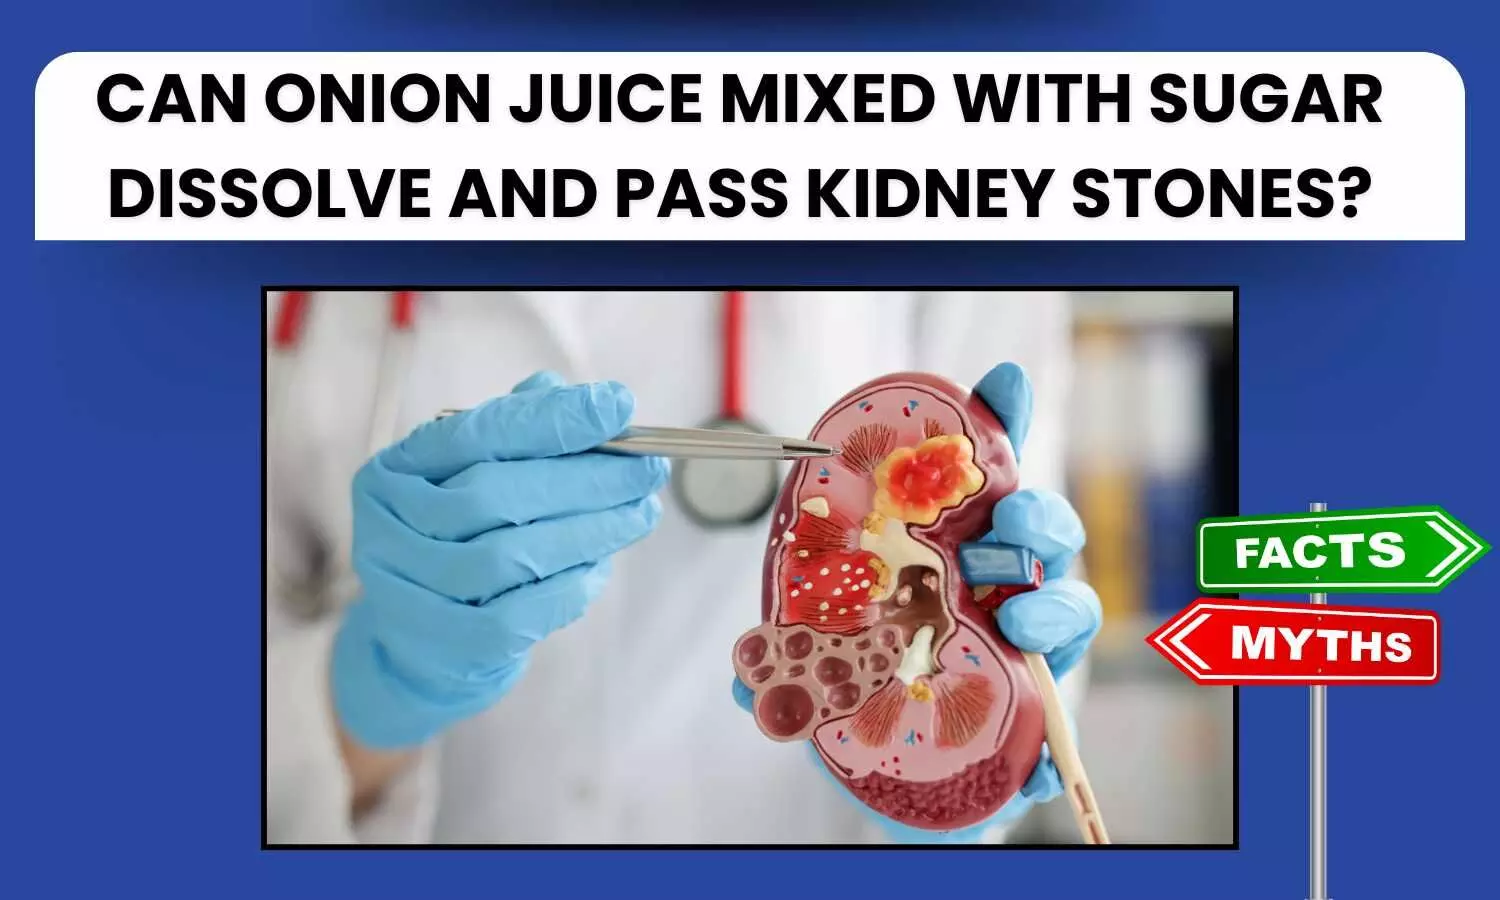 Can onion juice mixed with sugar dissolve and pass kidney stones?